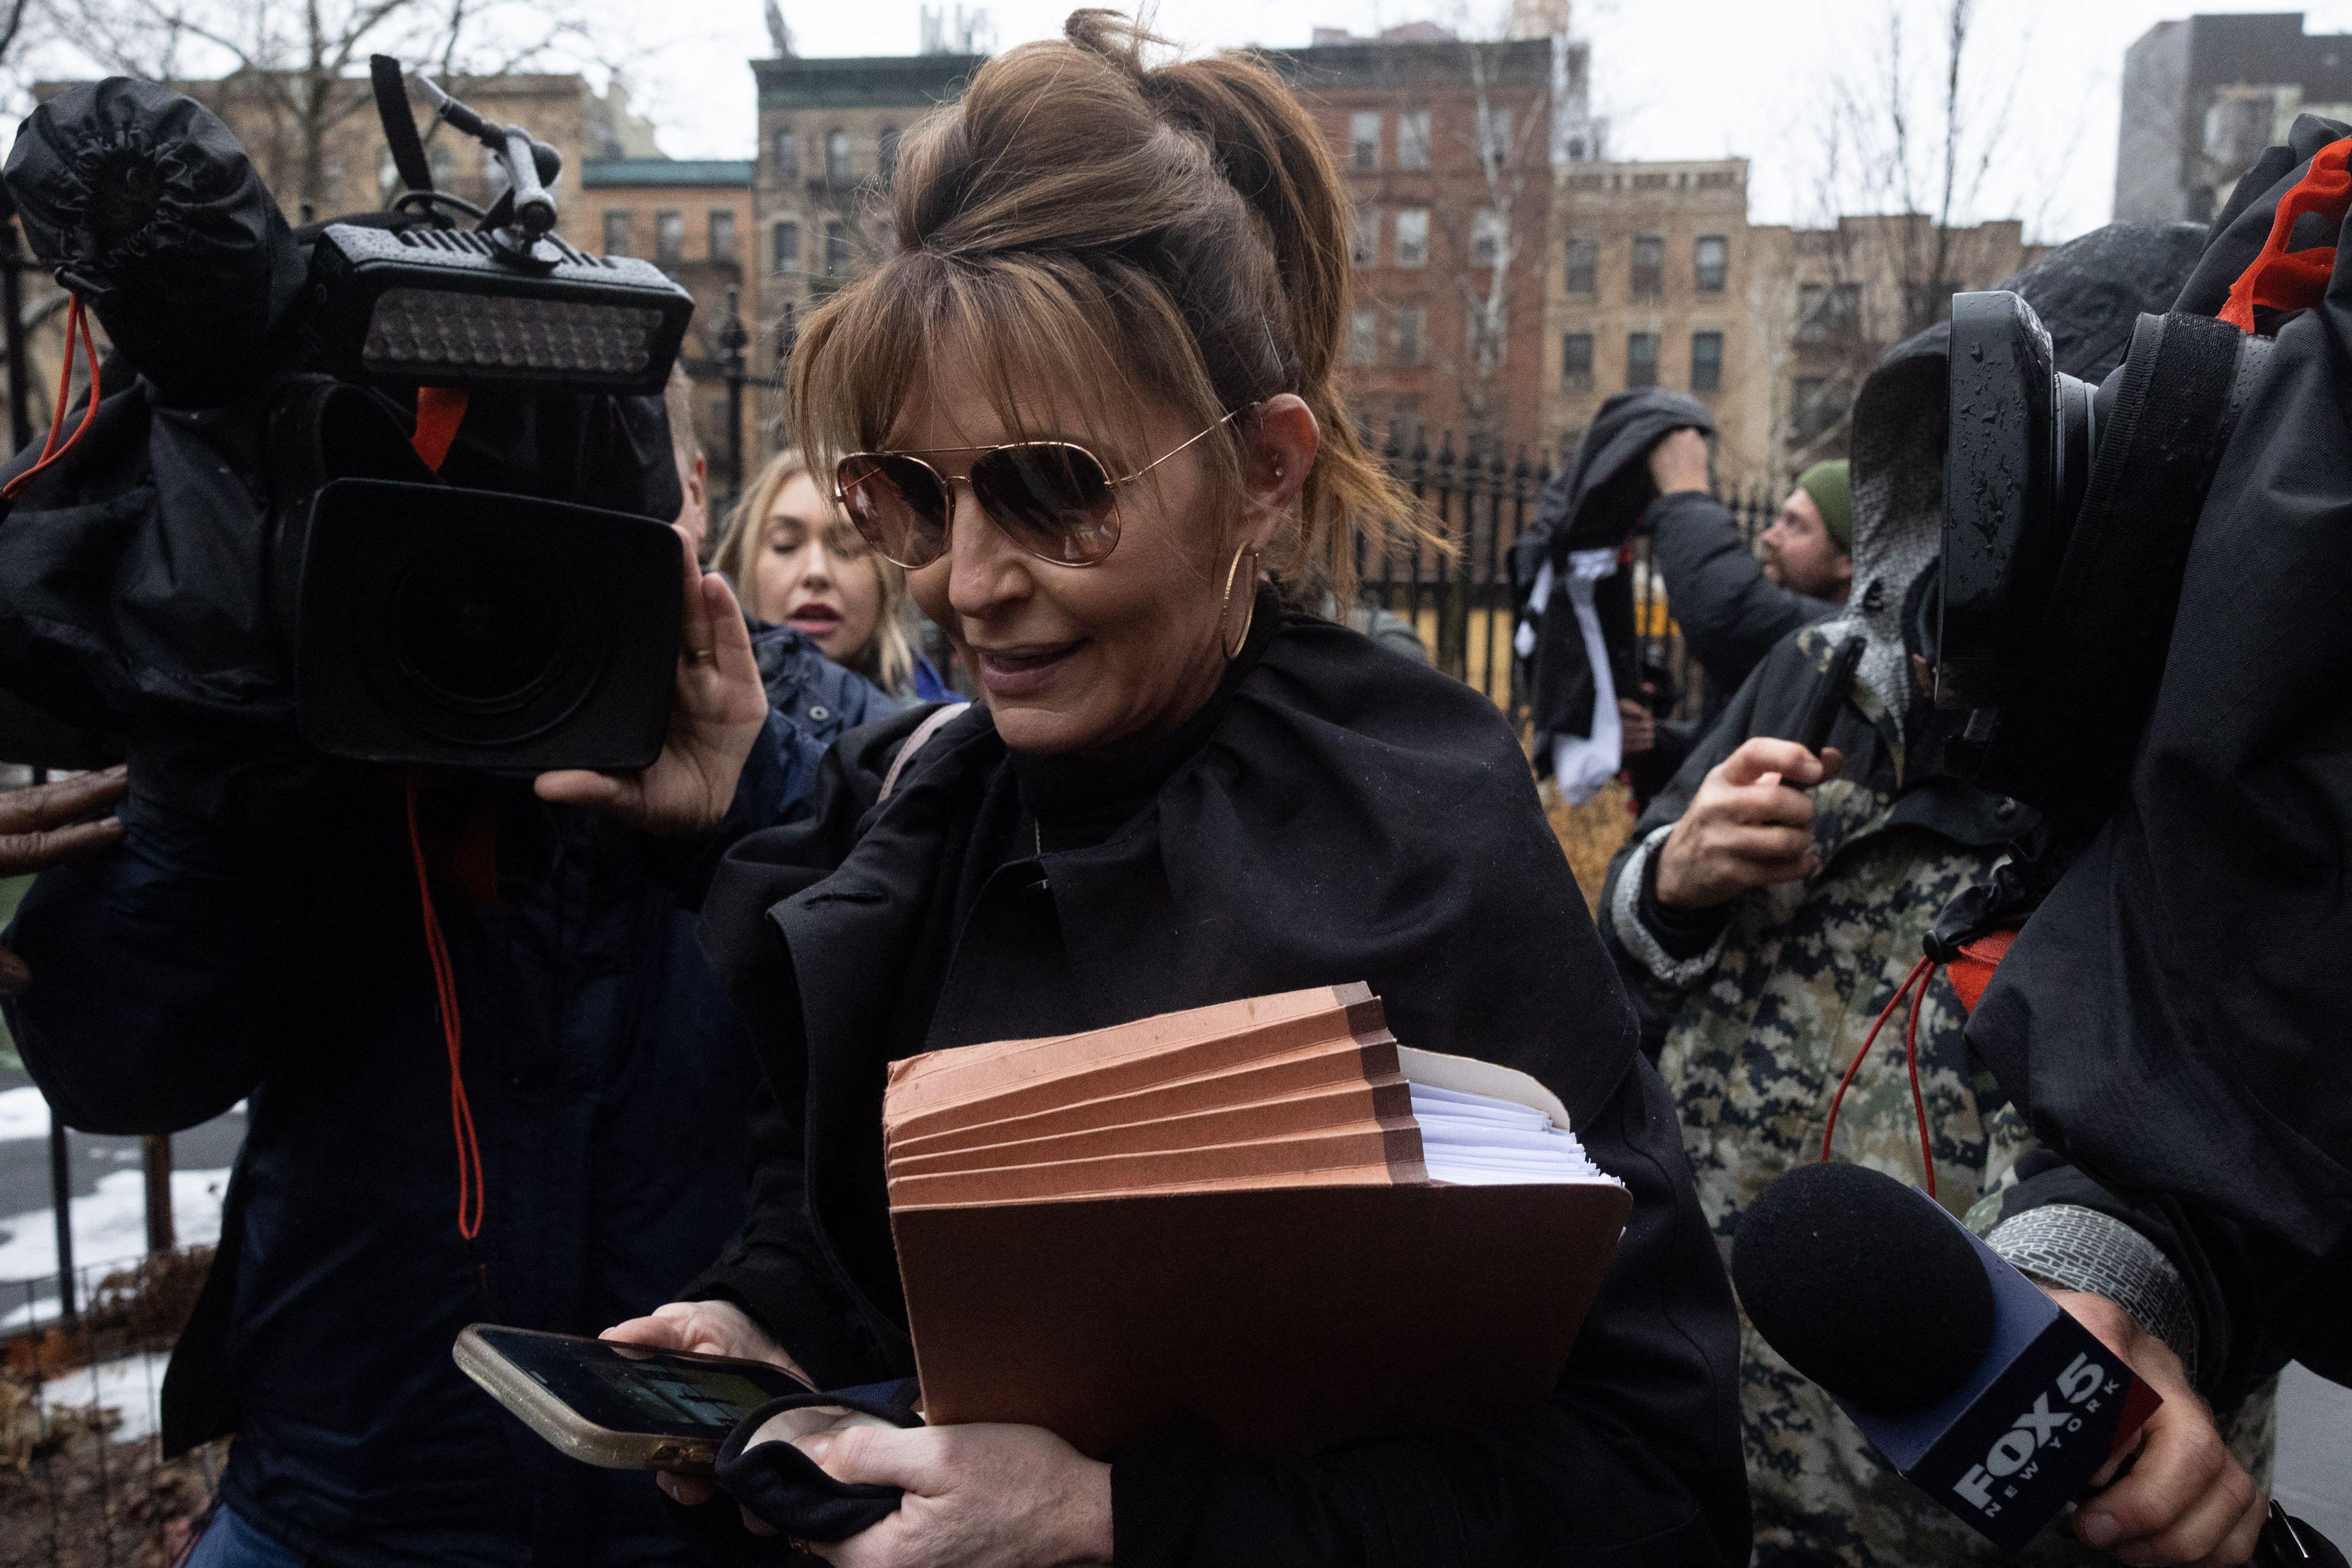 Members of the press surround Palin as she walks outside looking at her phone and holding an accordion file in the crook of her arm